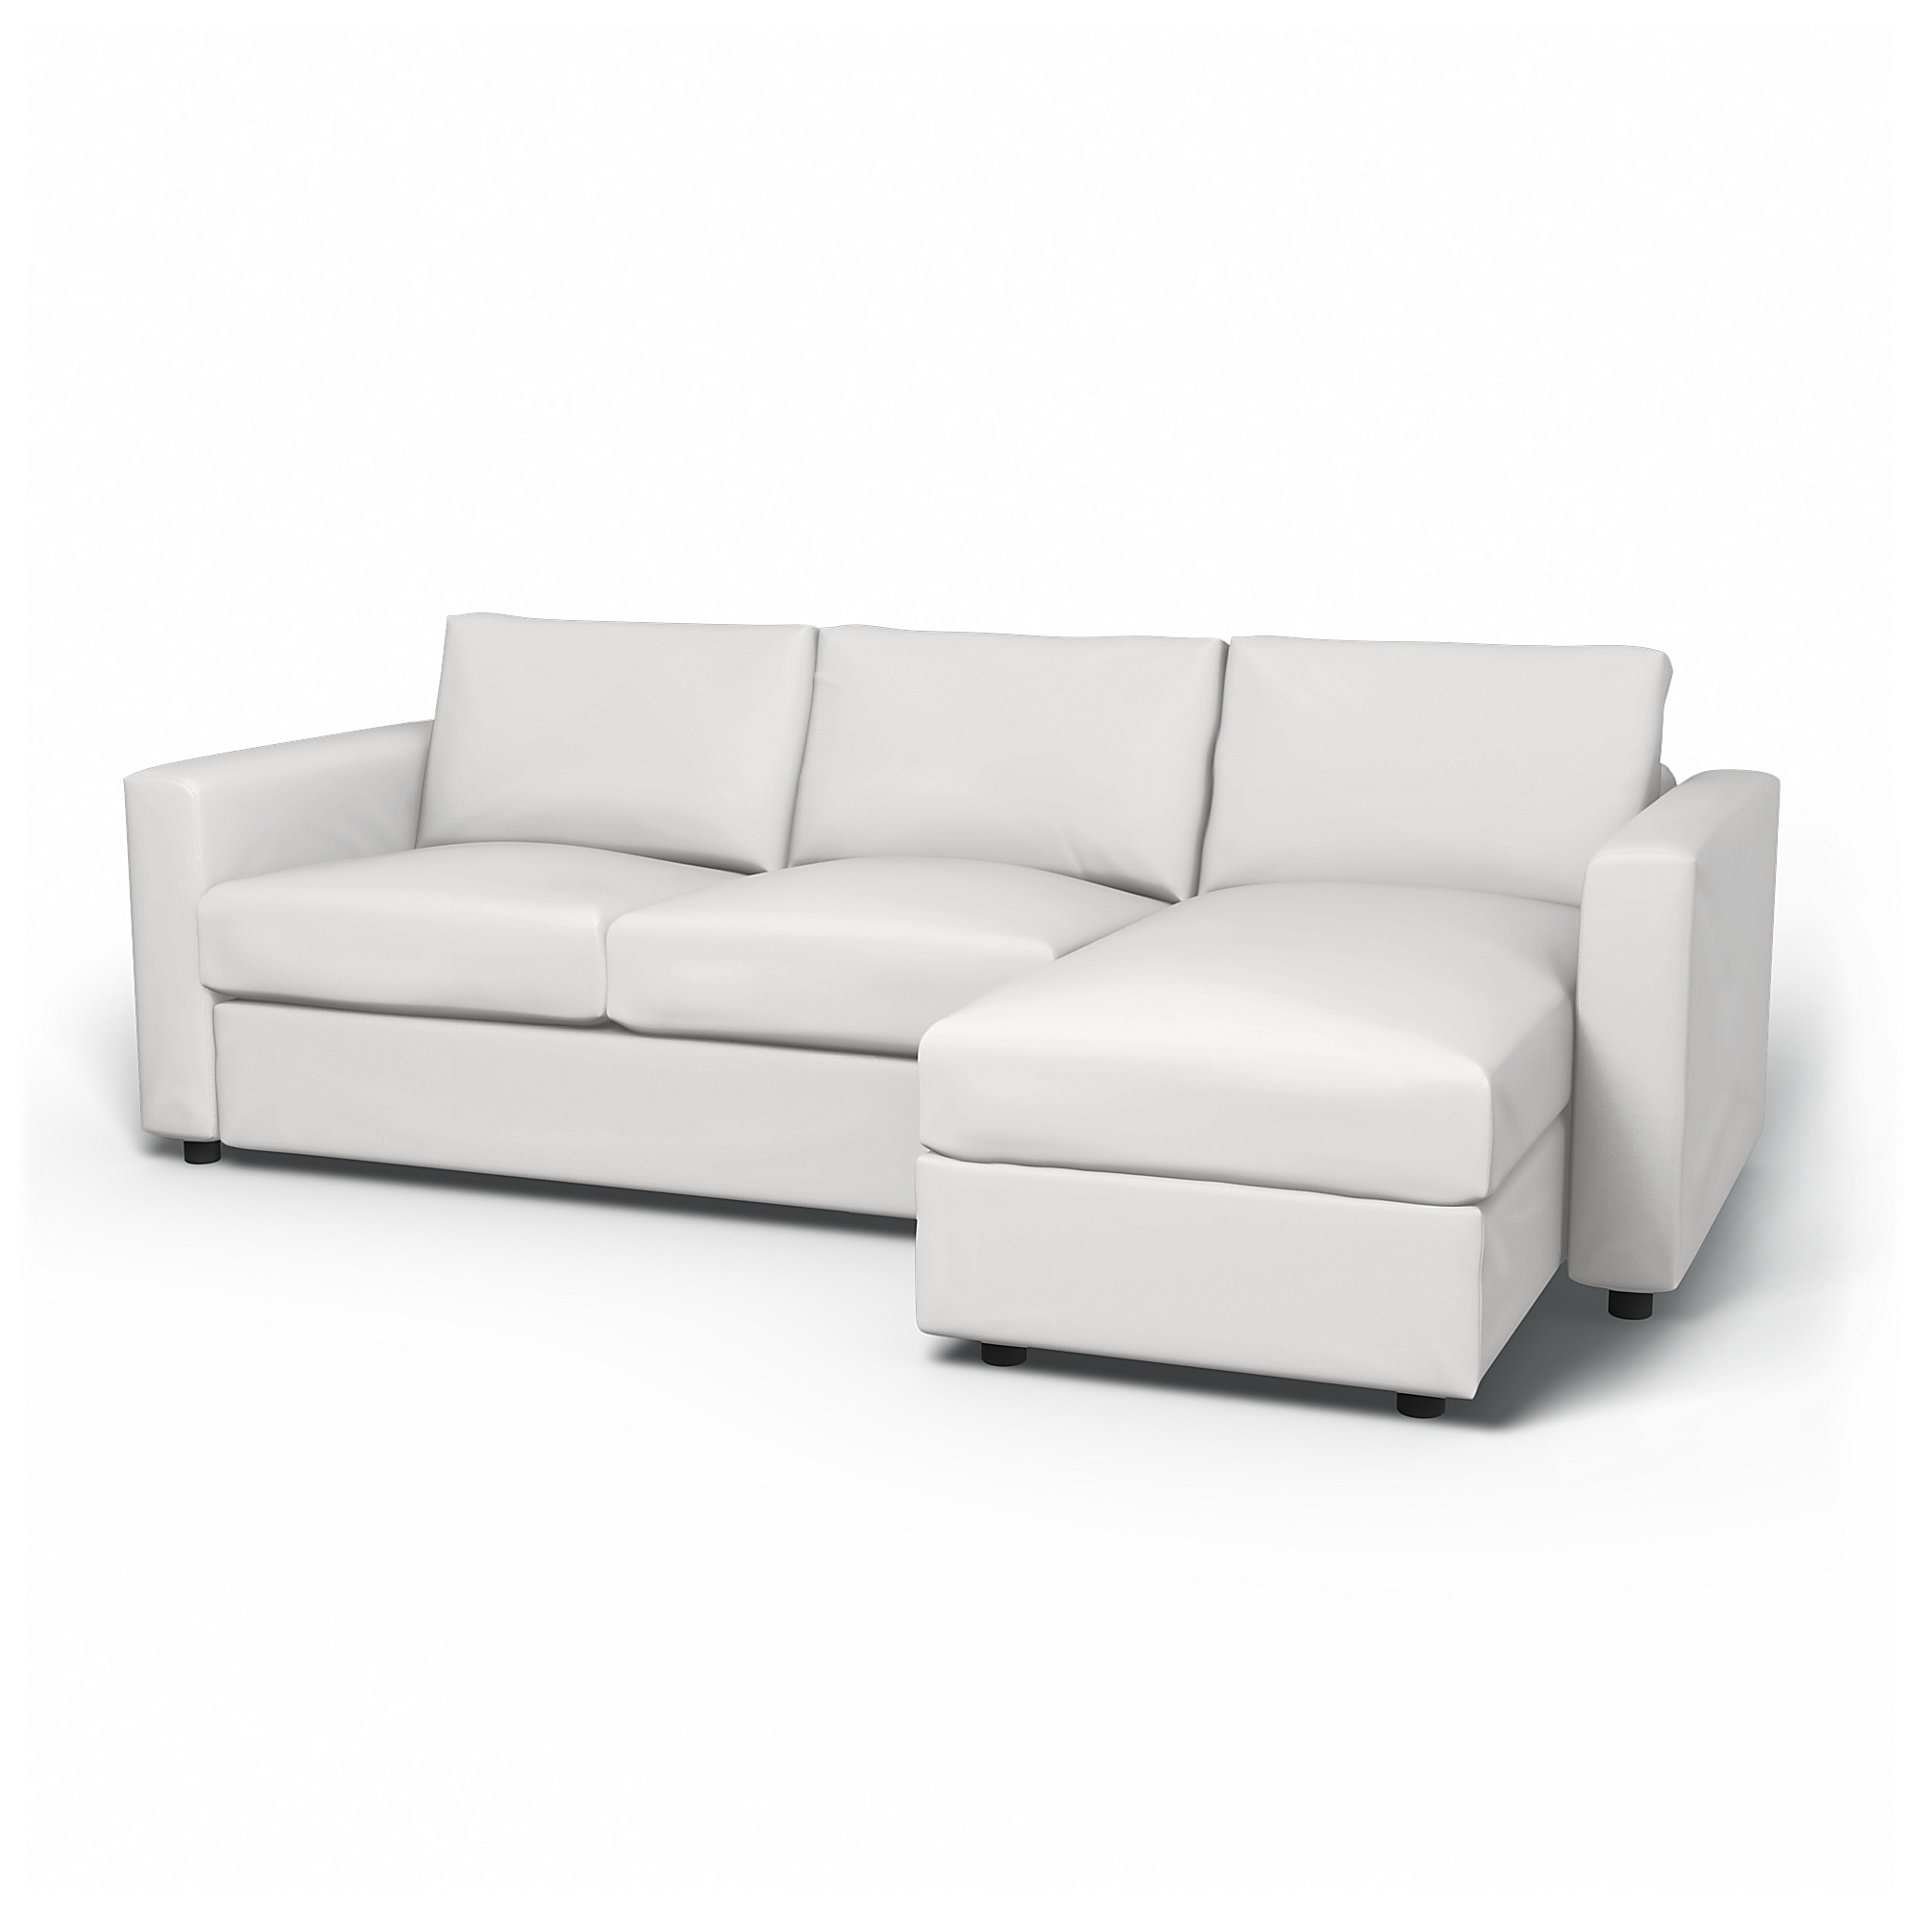 IKEA - Vimle 2 Seater Sofa with Chaise Cover, Absolute White, Cotton - Bemz